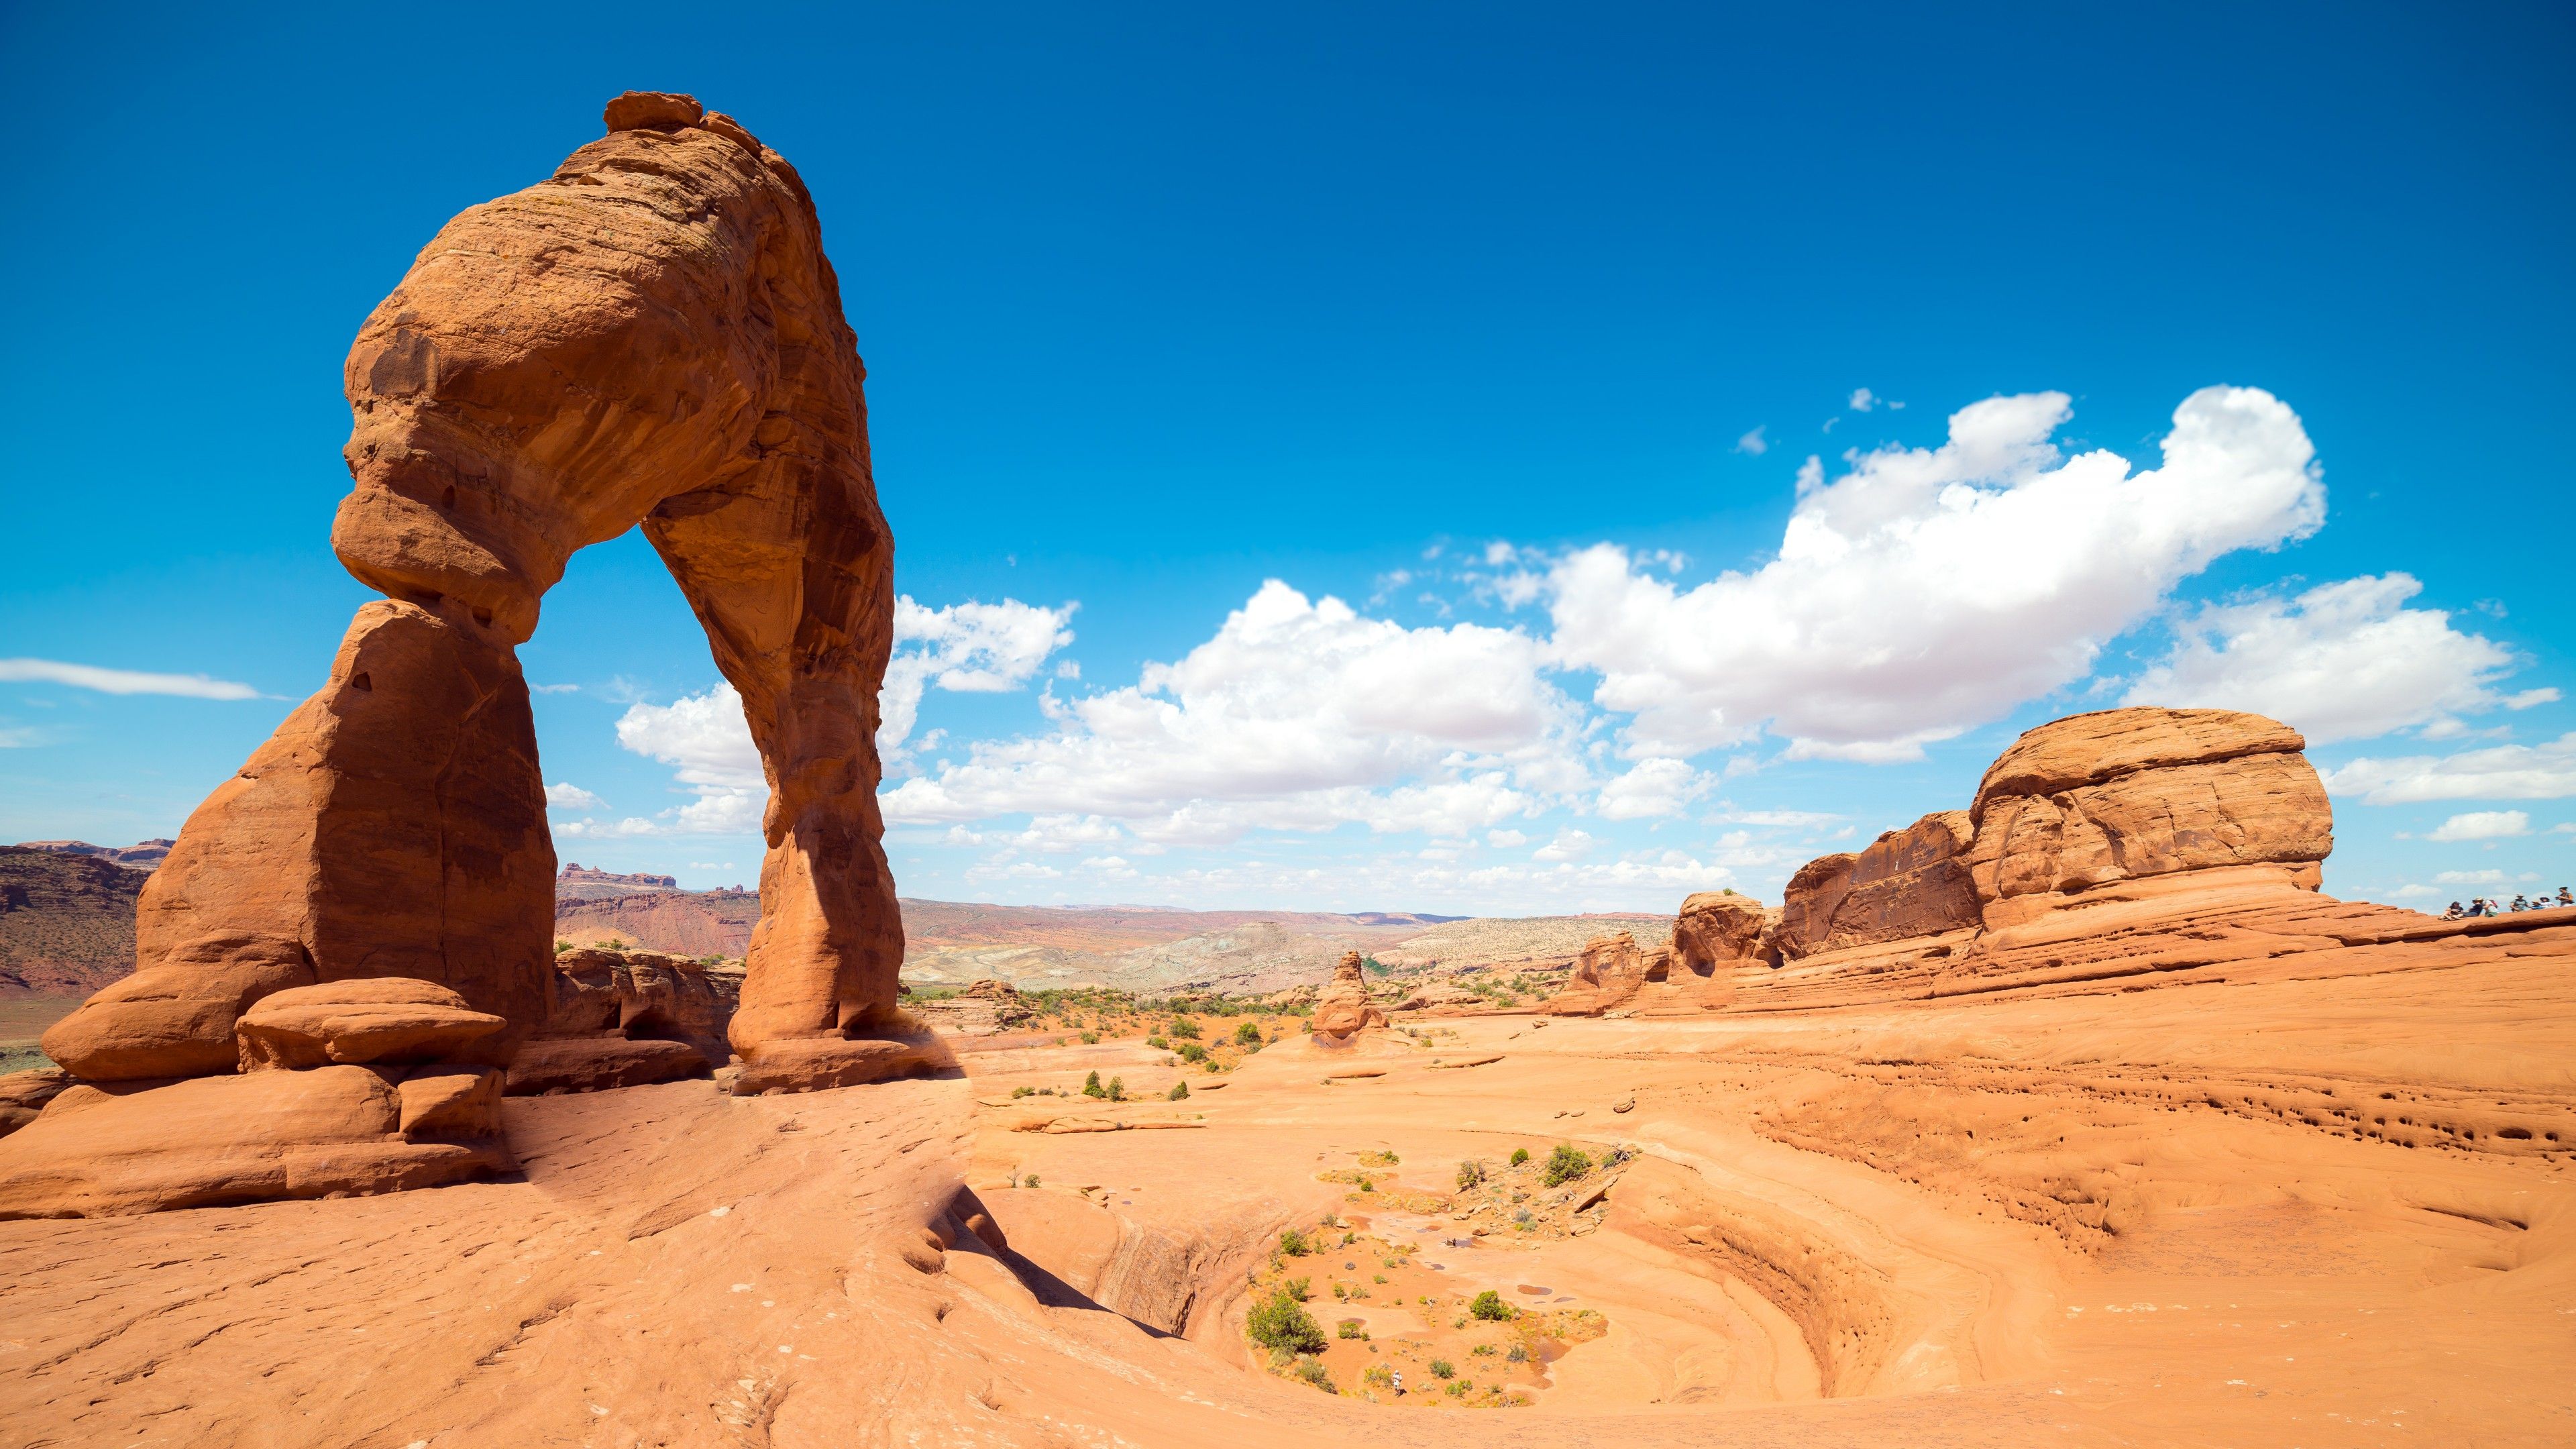 Delicate Arches 4K Wallpaper, Arches national park, Landmark, Utah, Clouds, Blue Sky, Rock formations, World